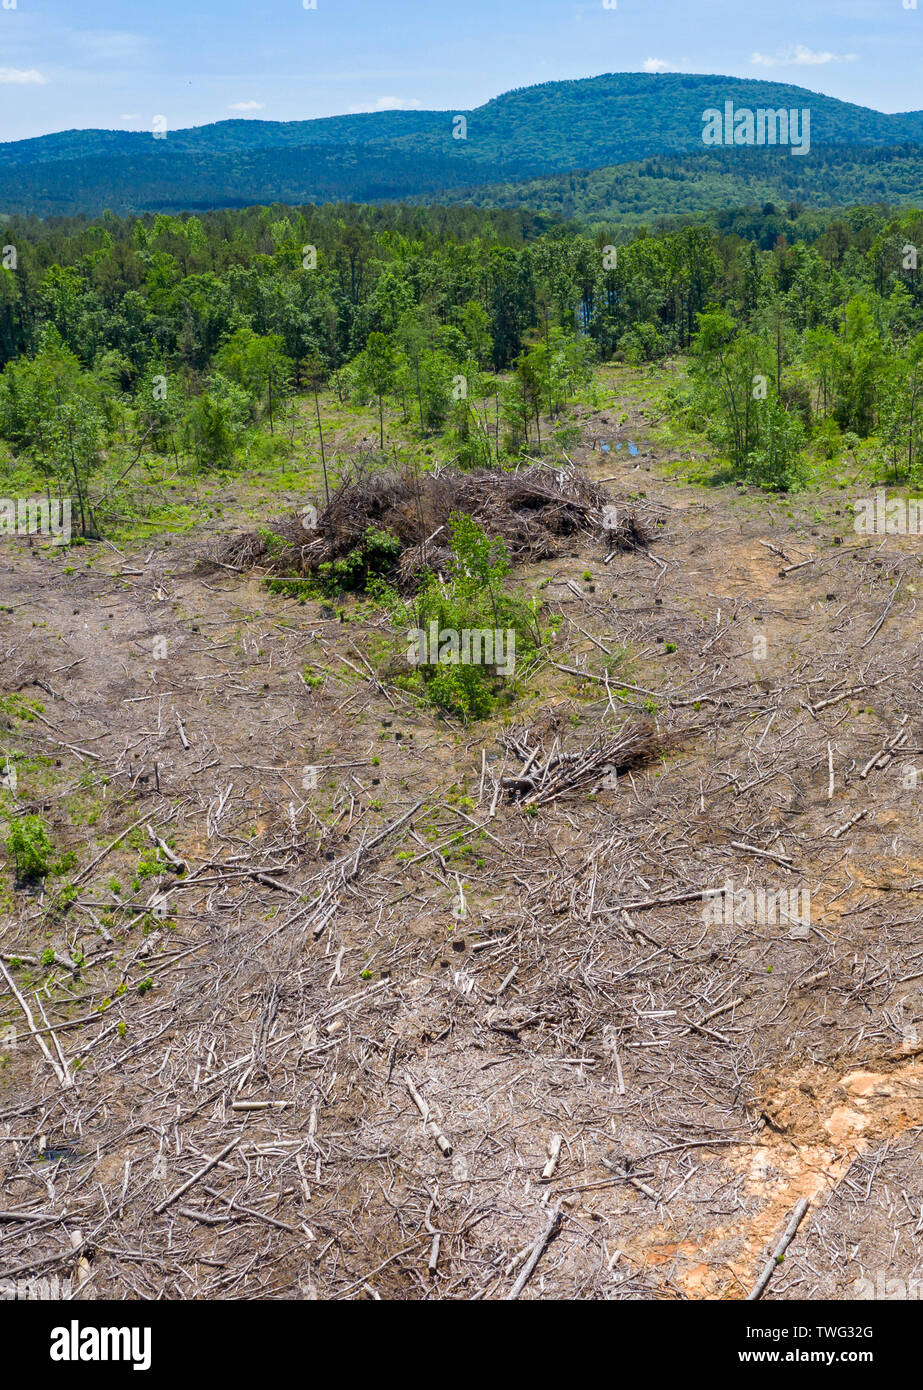 Williams Junction, Arkansas - A logging clear-cut in Ouachita National Forest. Stock Photo